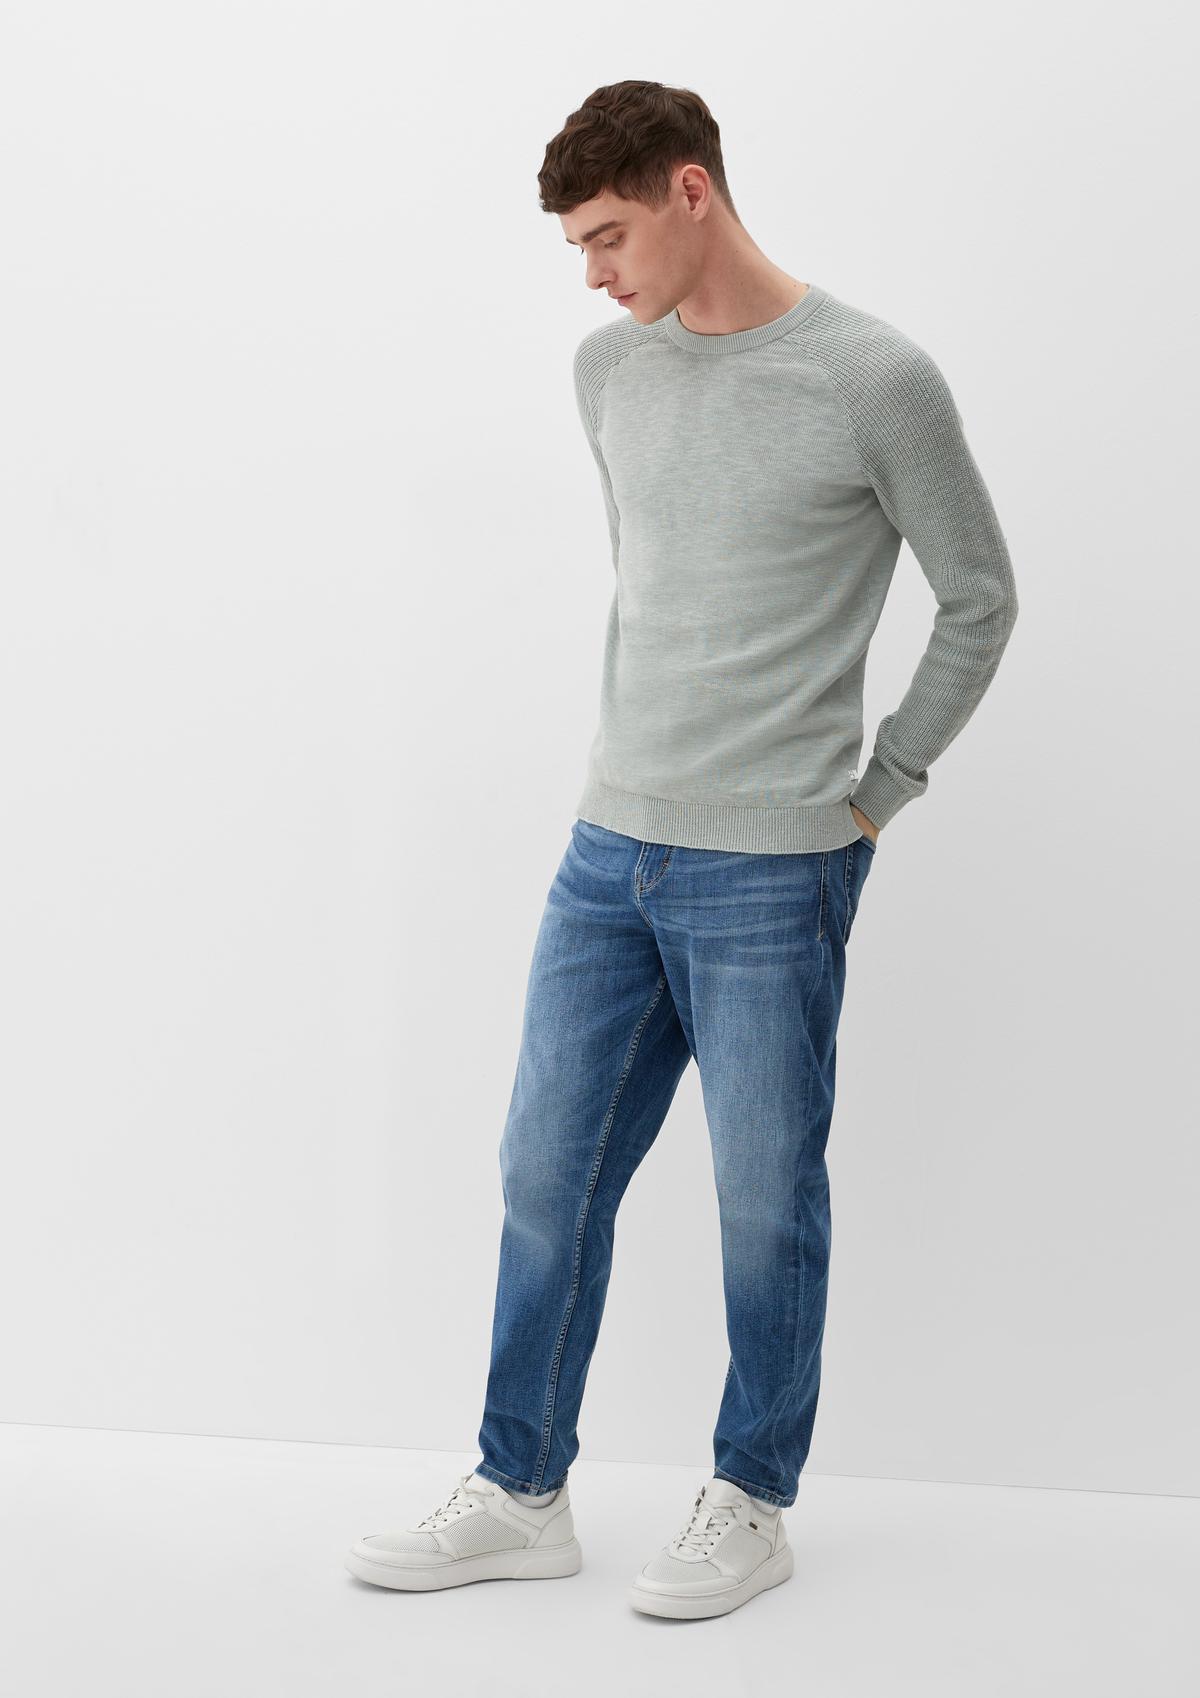 s.Oliver Jeans Brad / Relaxed Fit / Mid Rise / Tapered Leg